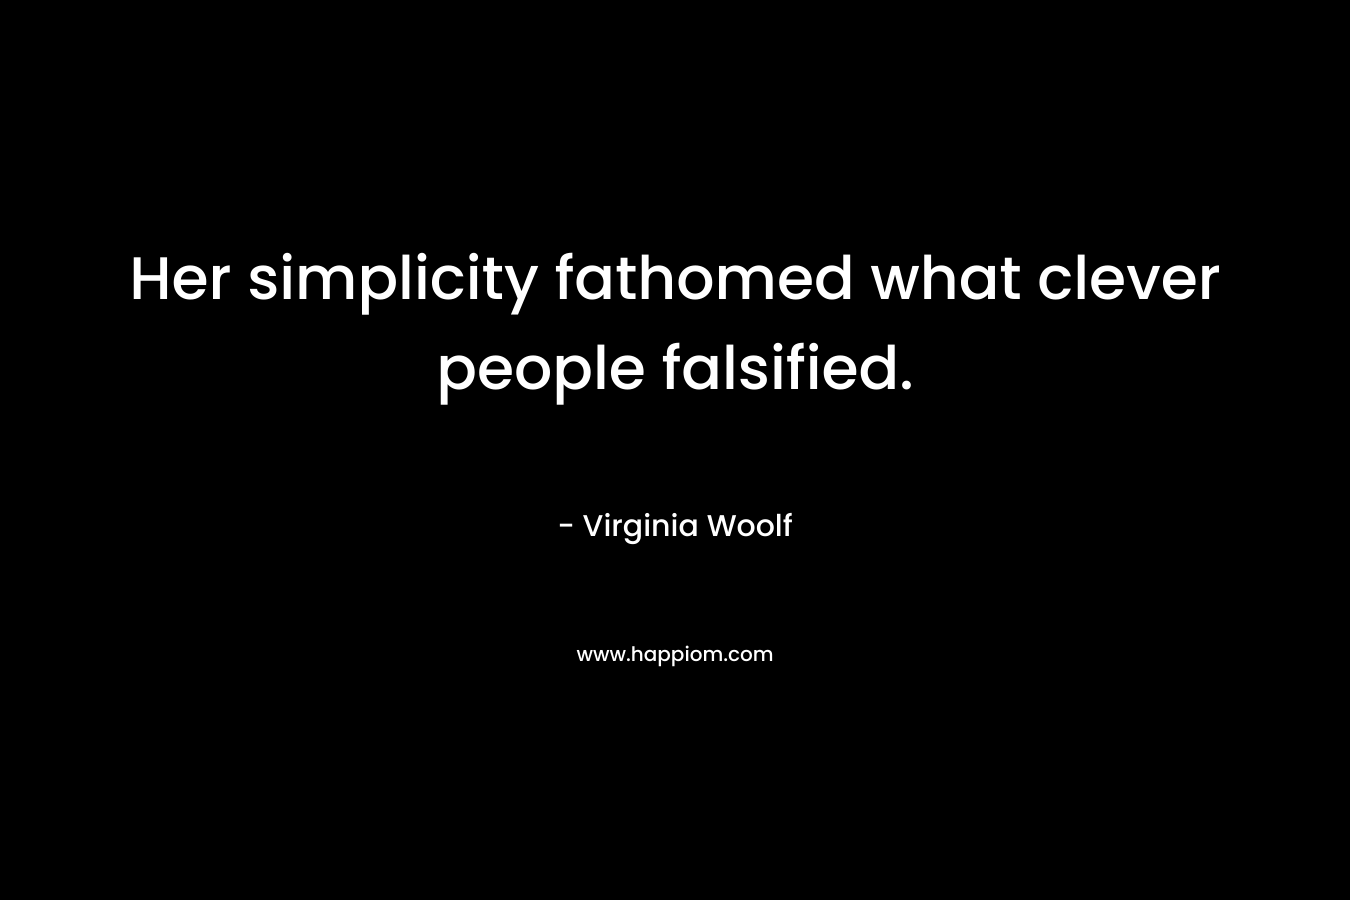 Her simplicity fathomed what clever people falsified. – Virginia Woolf